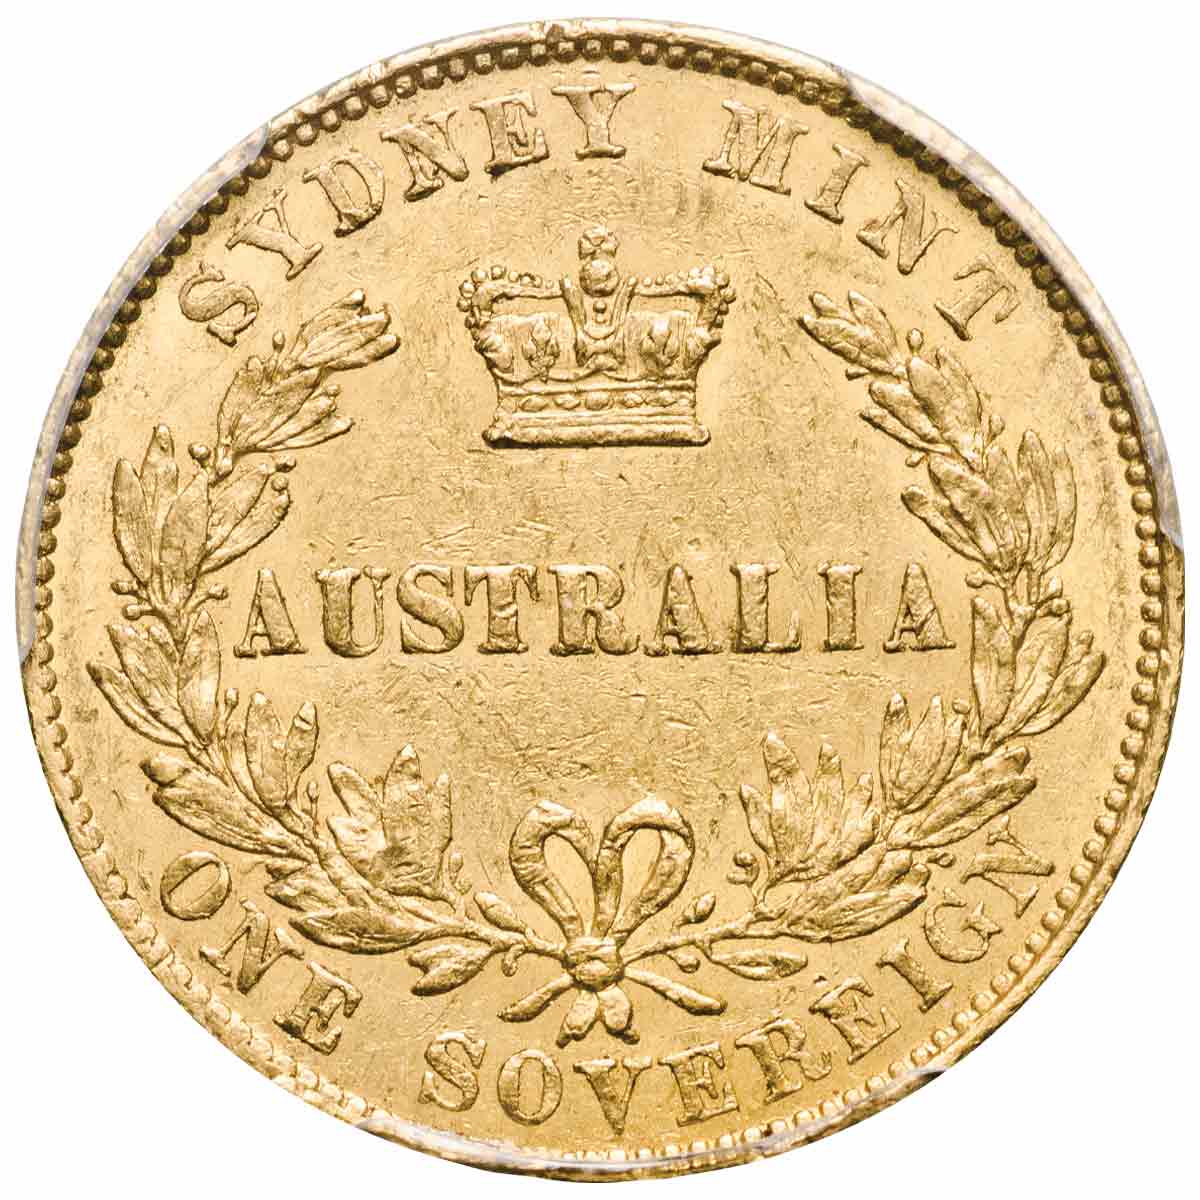 1856 Sydney Mint Sovereign Type I PCGS AU55 (about Uncirculated)